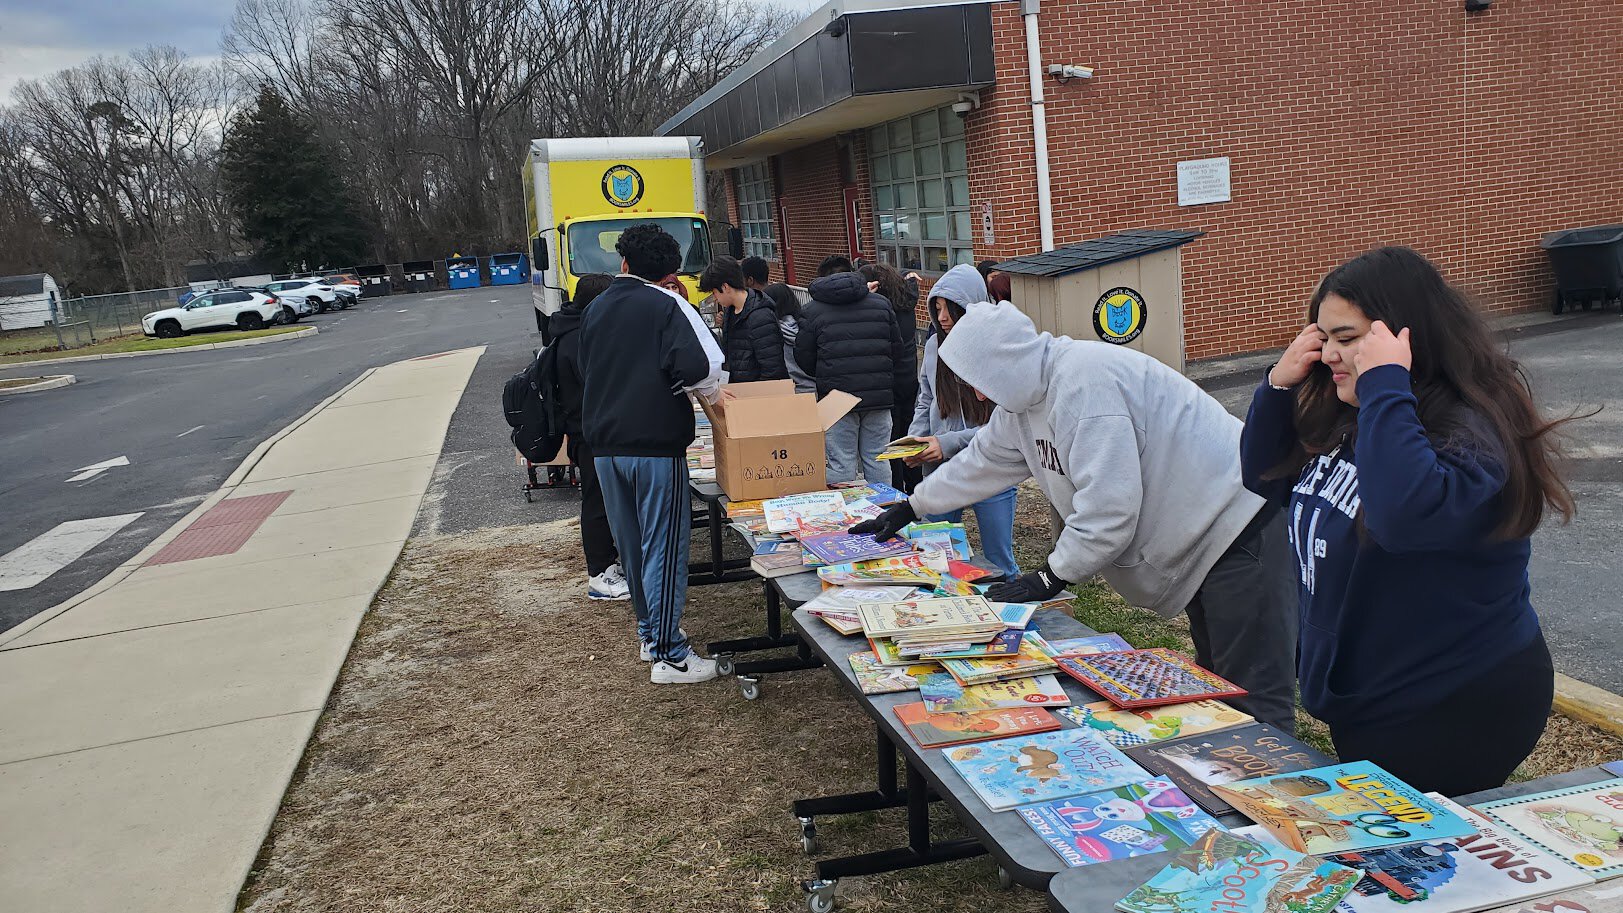 People stand behind tables displaying books outside a brick building.